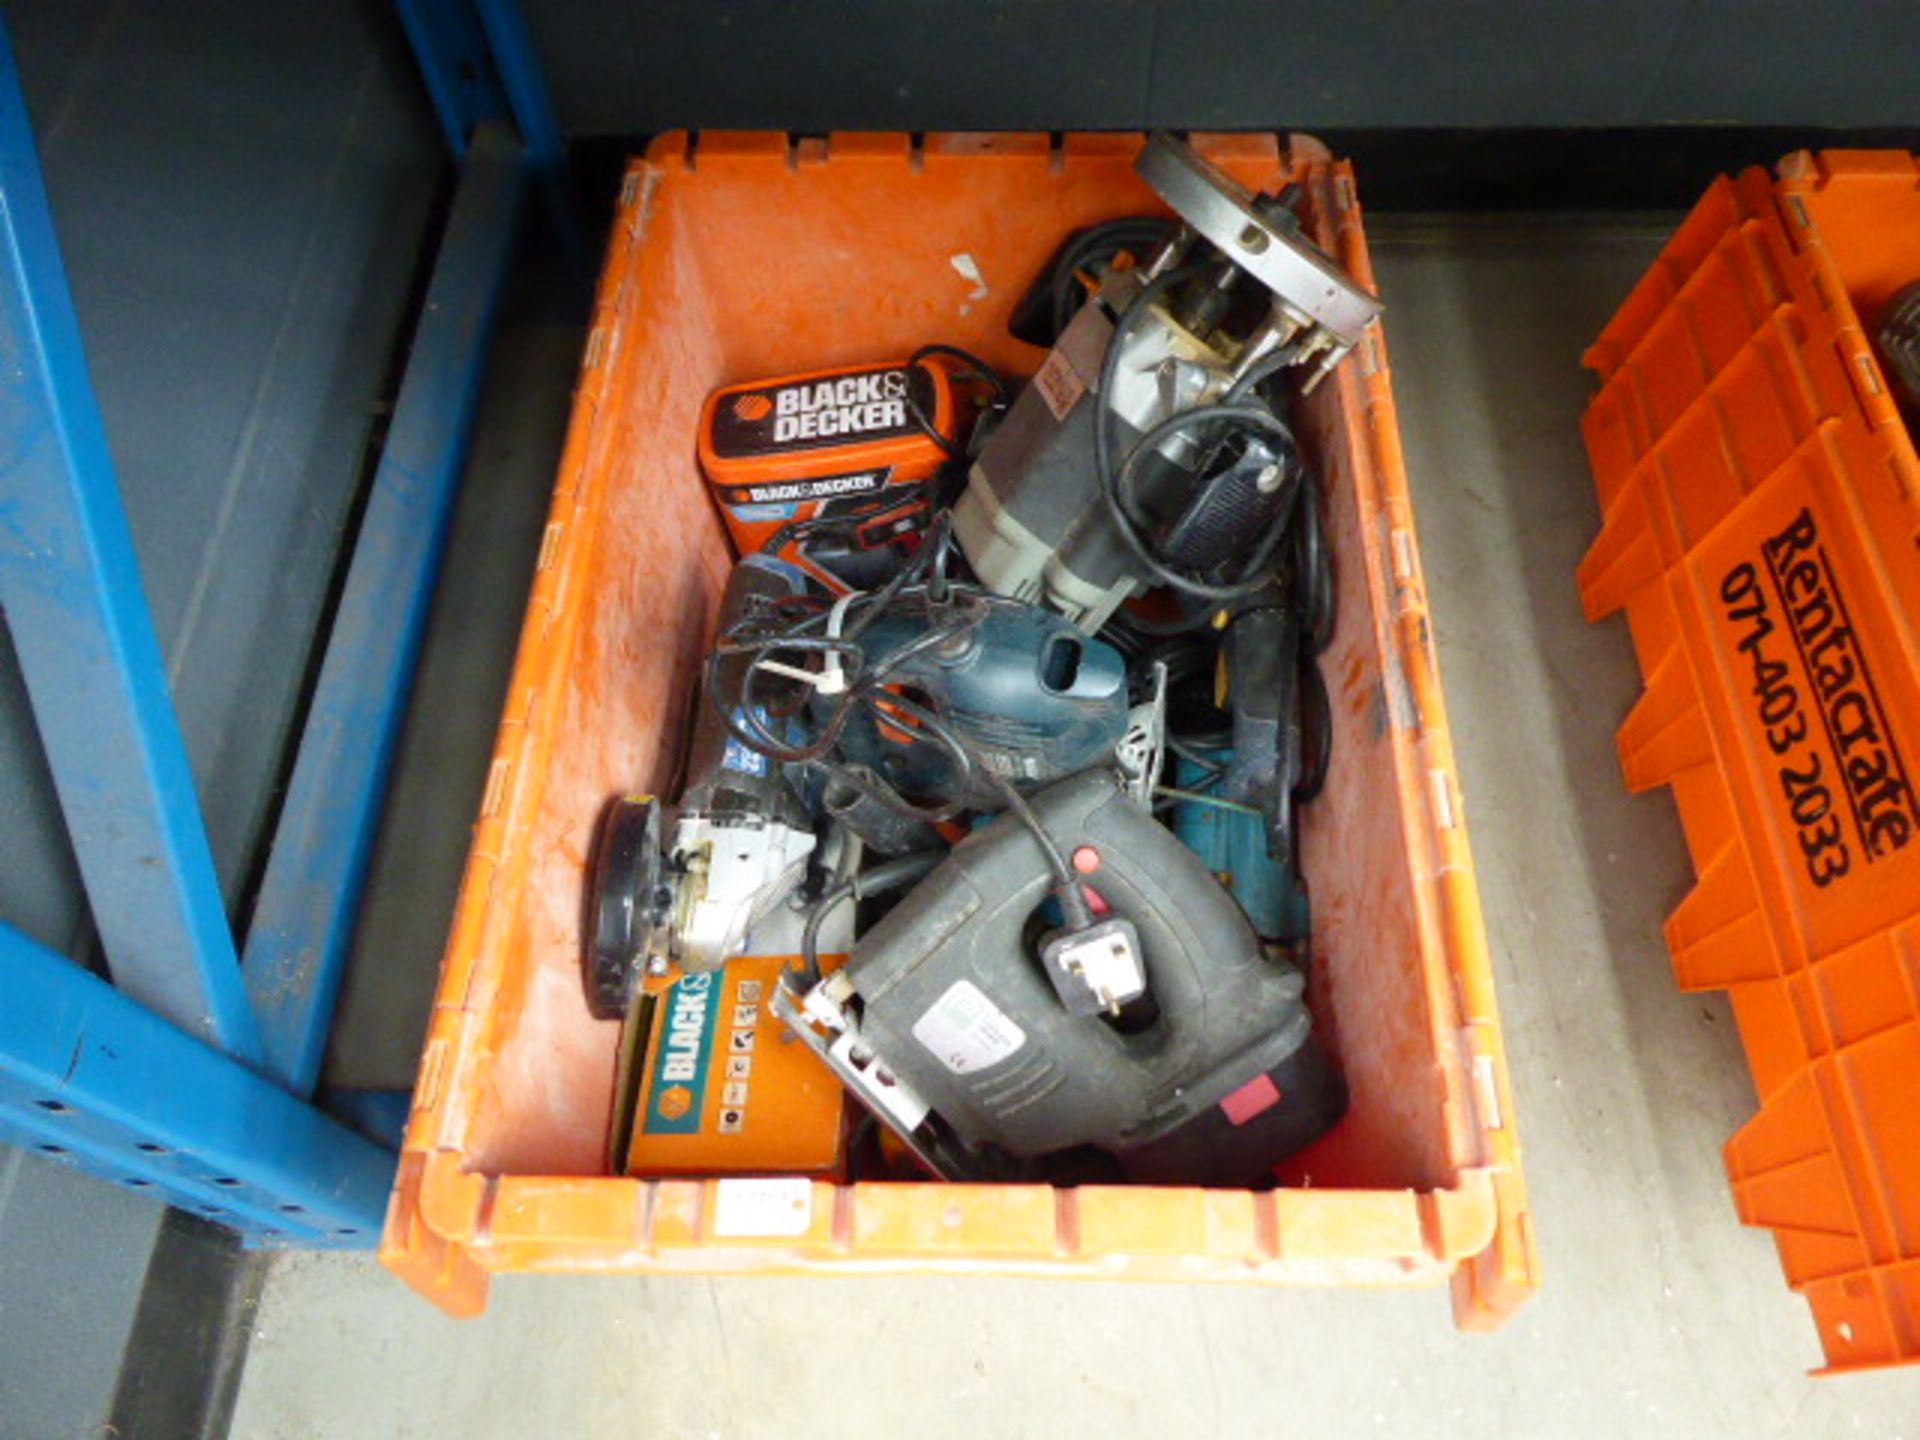 Orange plastic box containing router, jigsaws, angle grinder and various other tools